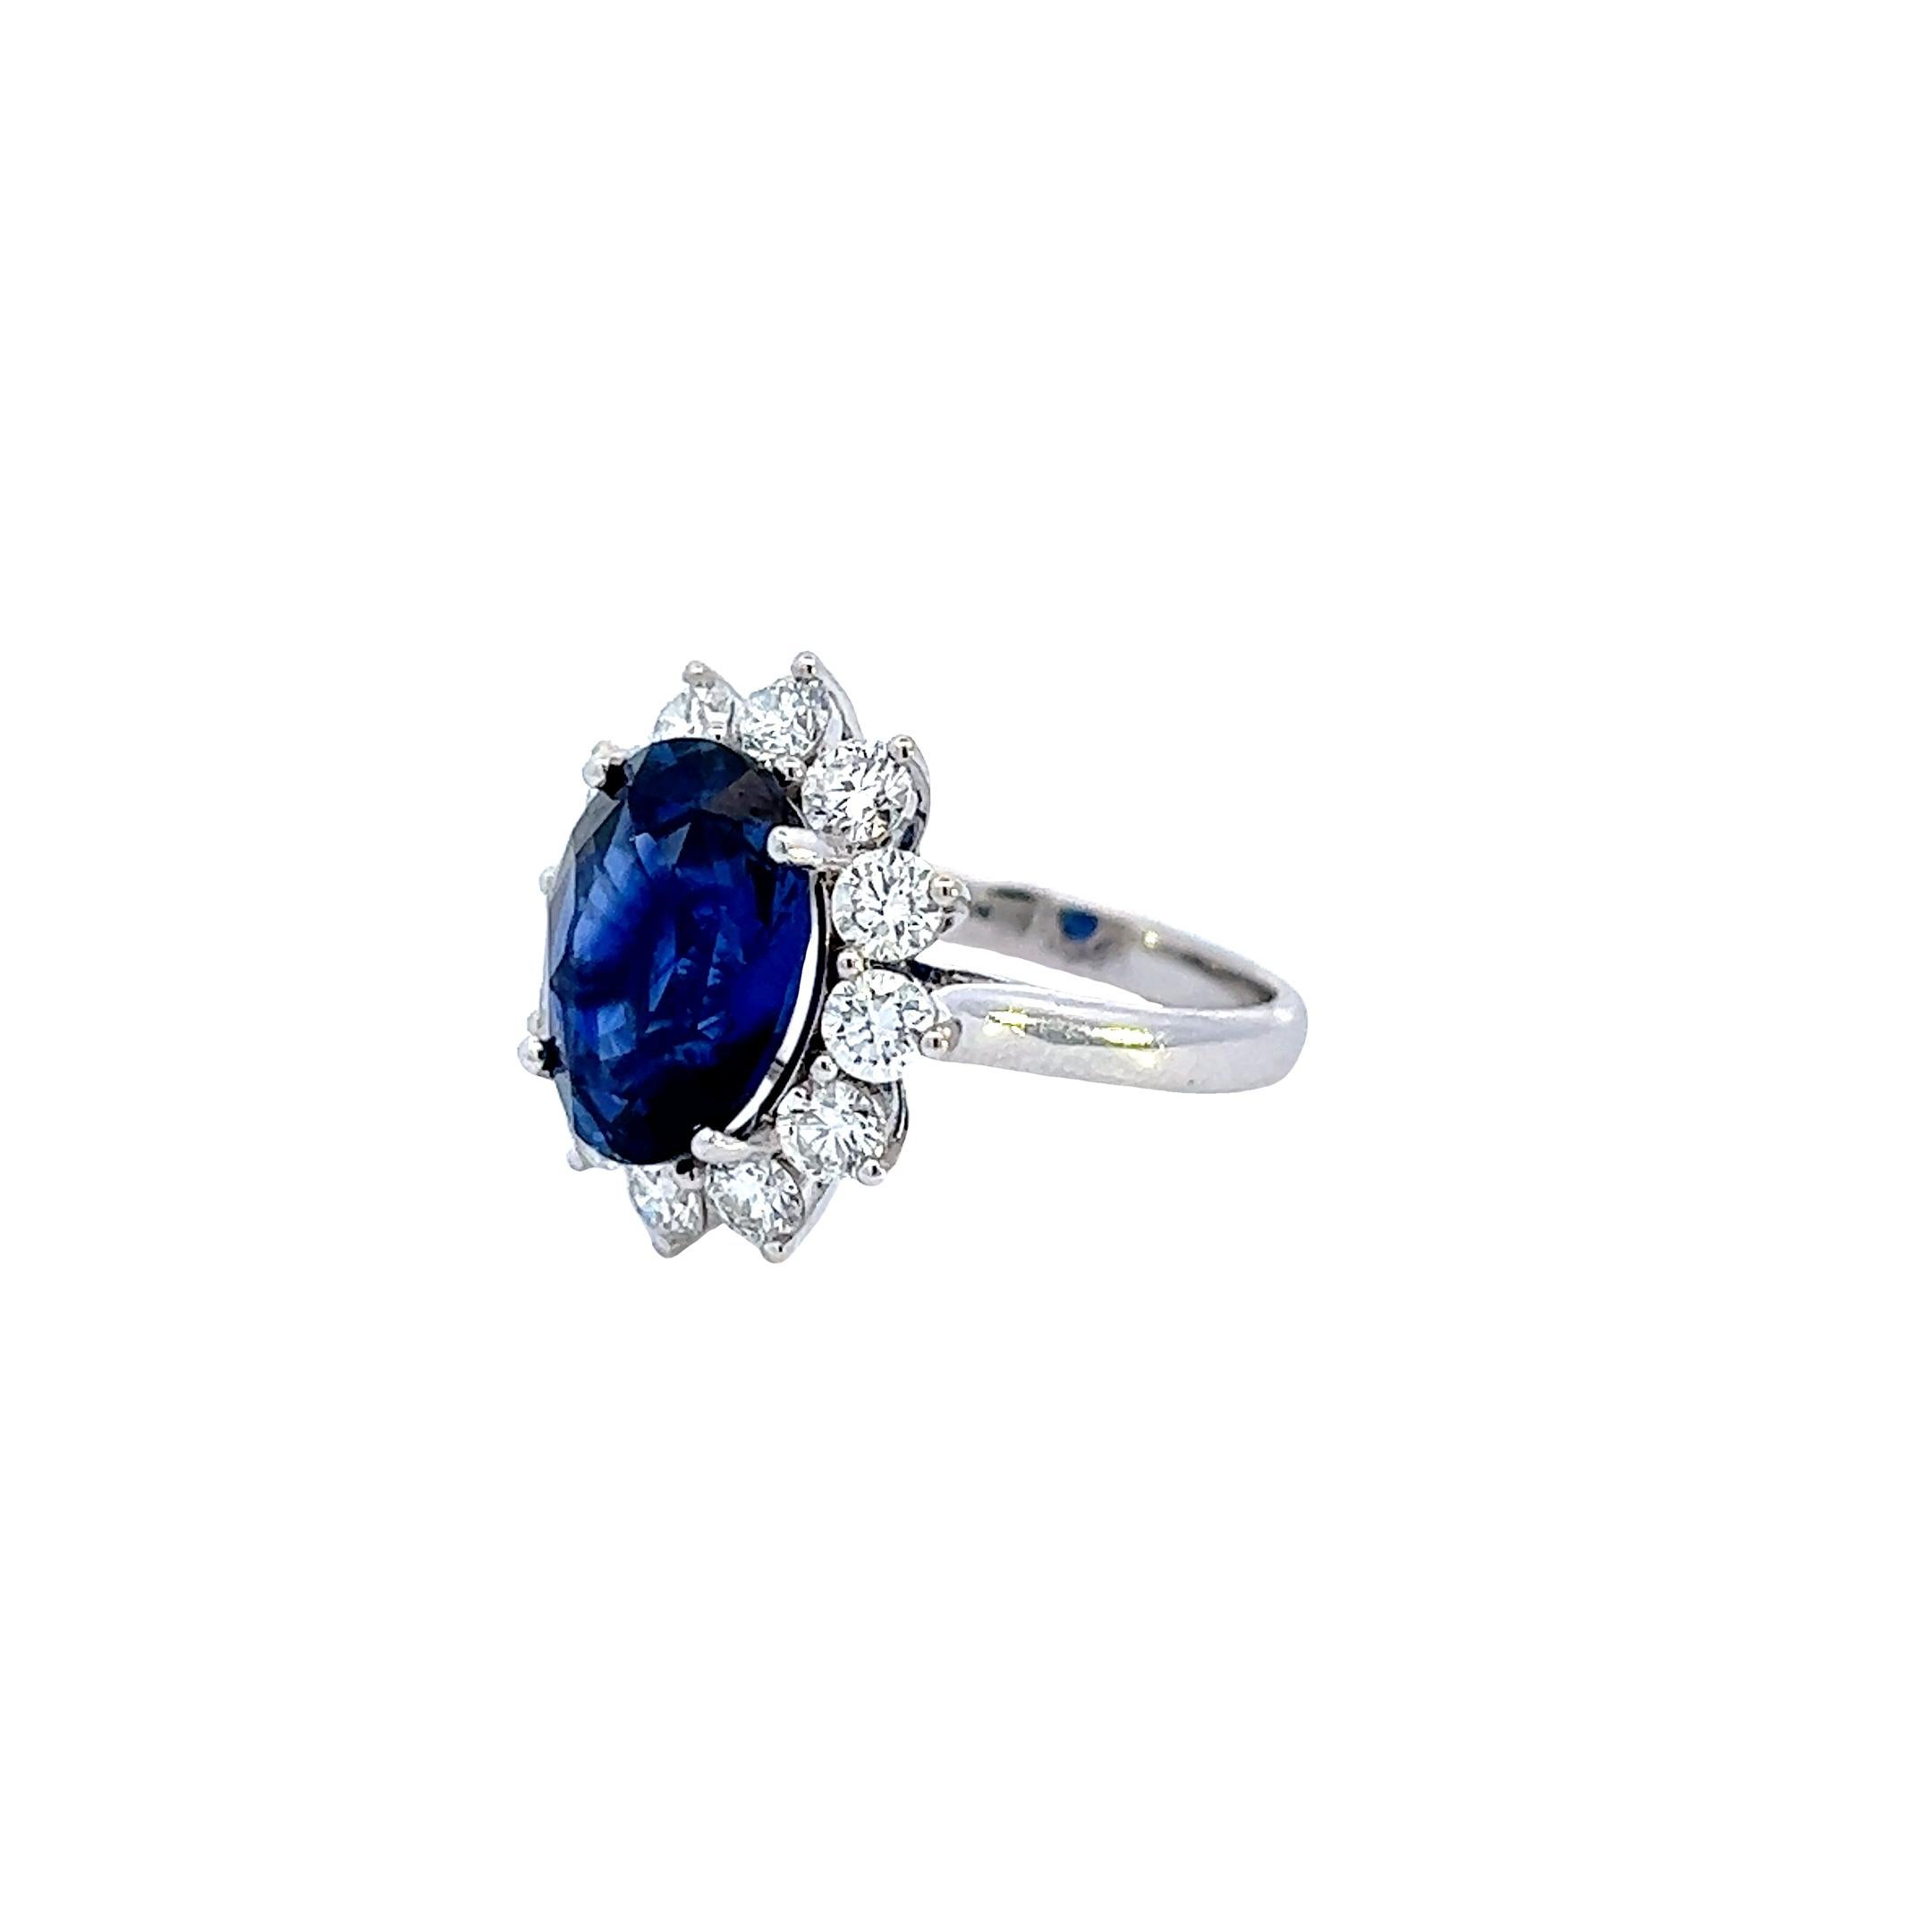 Oval Cut Beauty 18k White Gold Ceylon Sapphire Ring, 6.46ct, Christian Dunaigre Certified For Sale